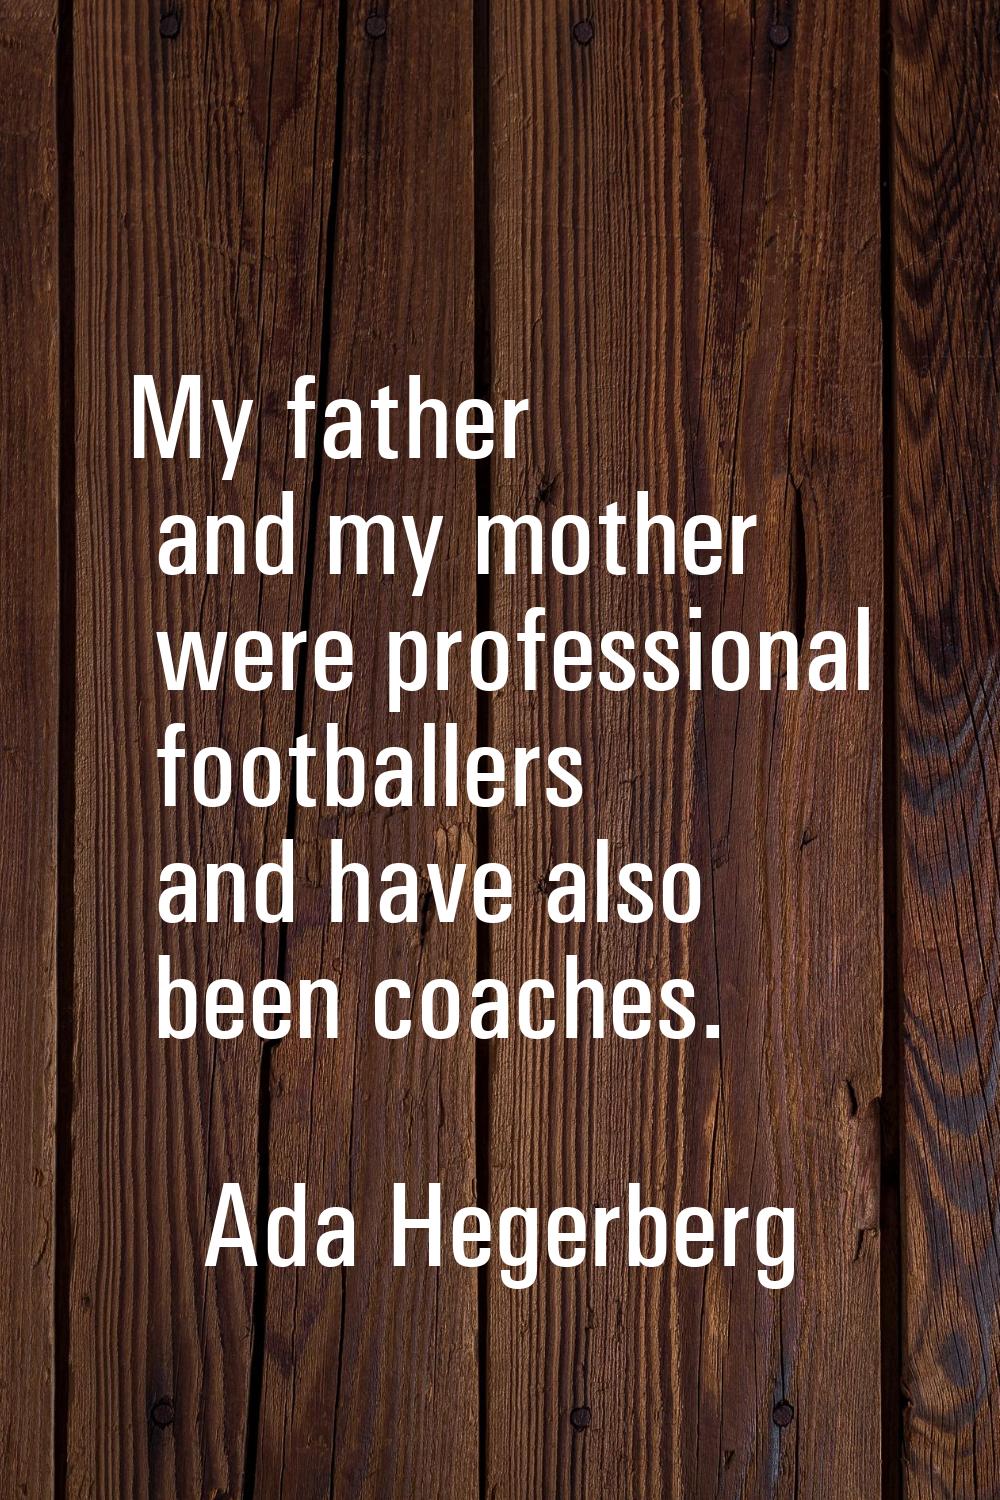 My father and my mother were professional footballers and have also been coaches.